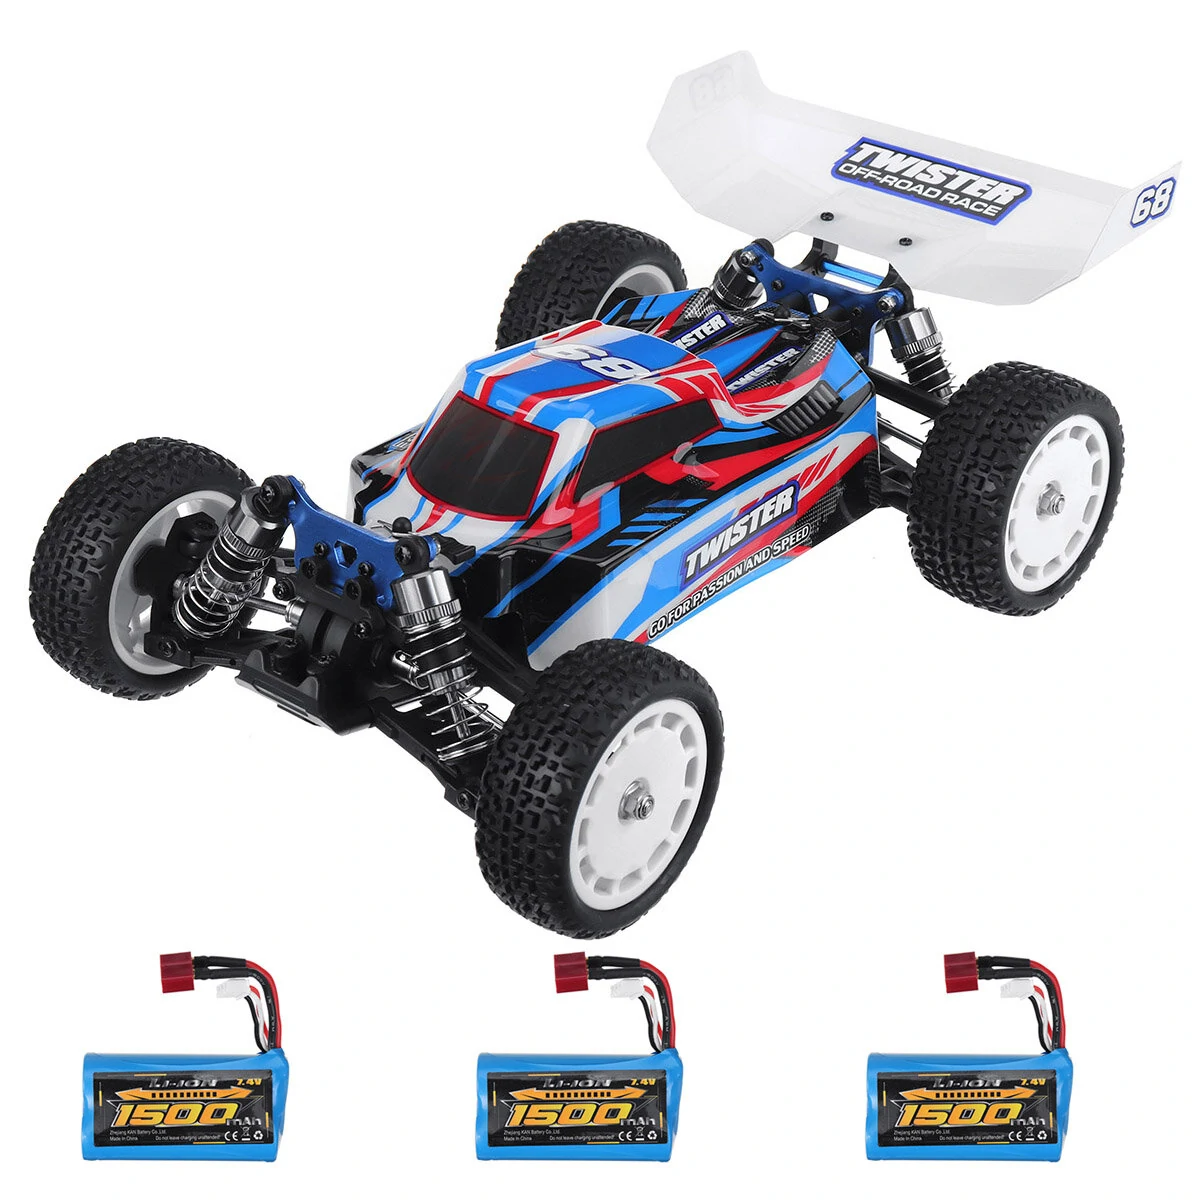 Eachine EC30B Several Battery RTR 1/14 2.4G 4WD 65km/h Brushless Upgraded Proportional RC Car Vehicles Models - One Battery